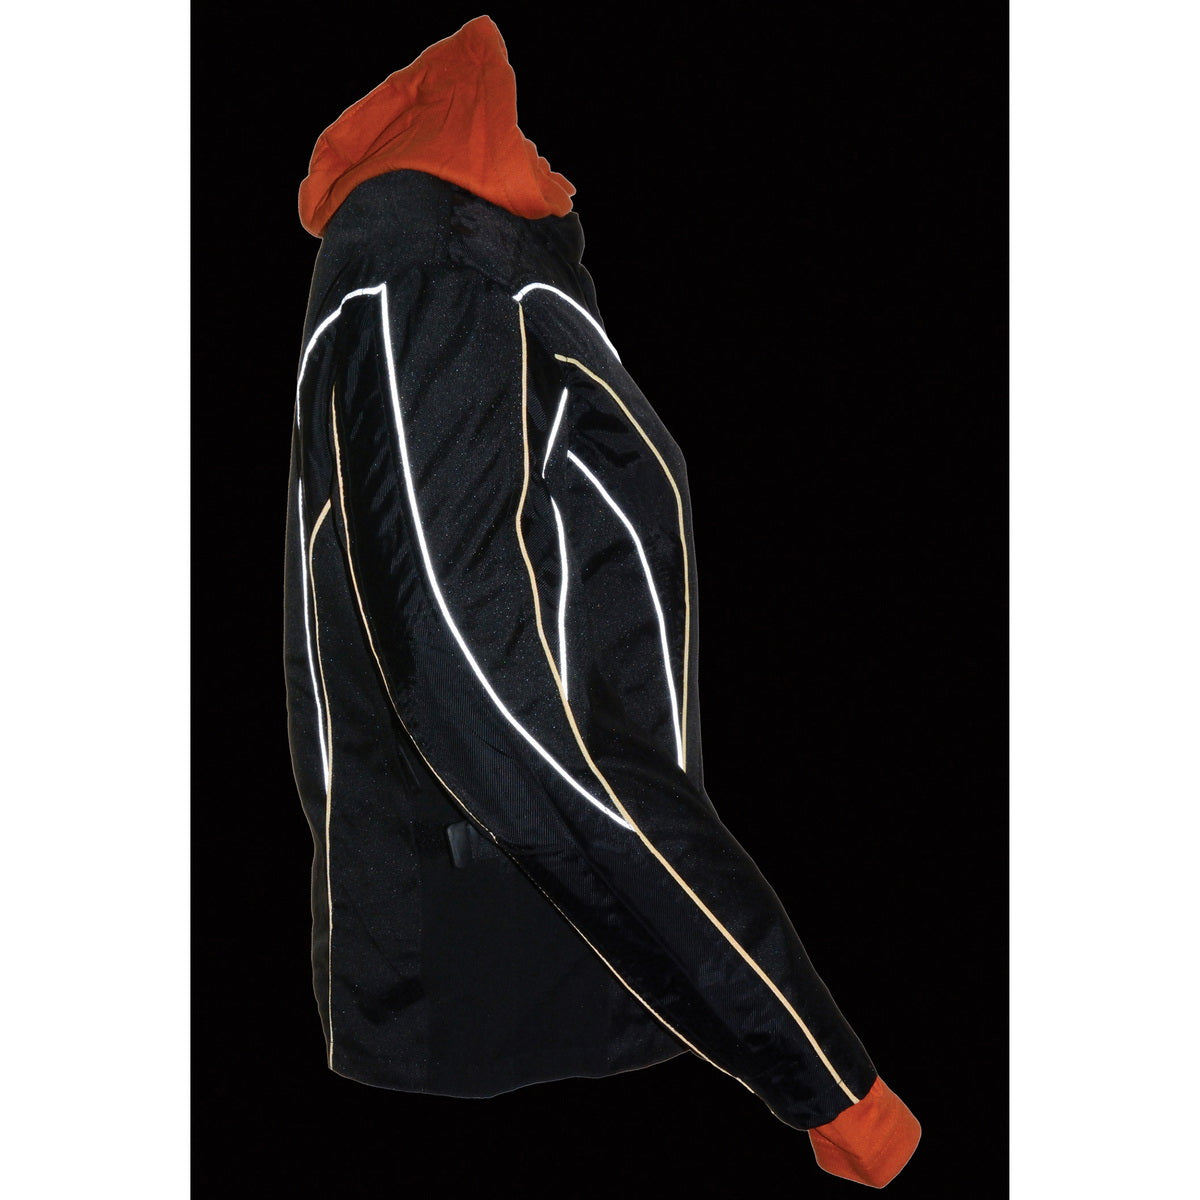 NexGen SH1960 Women's Black Hooded Textile Jacket with Reflective Piping